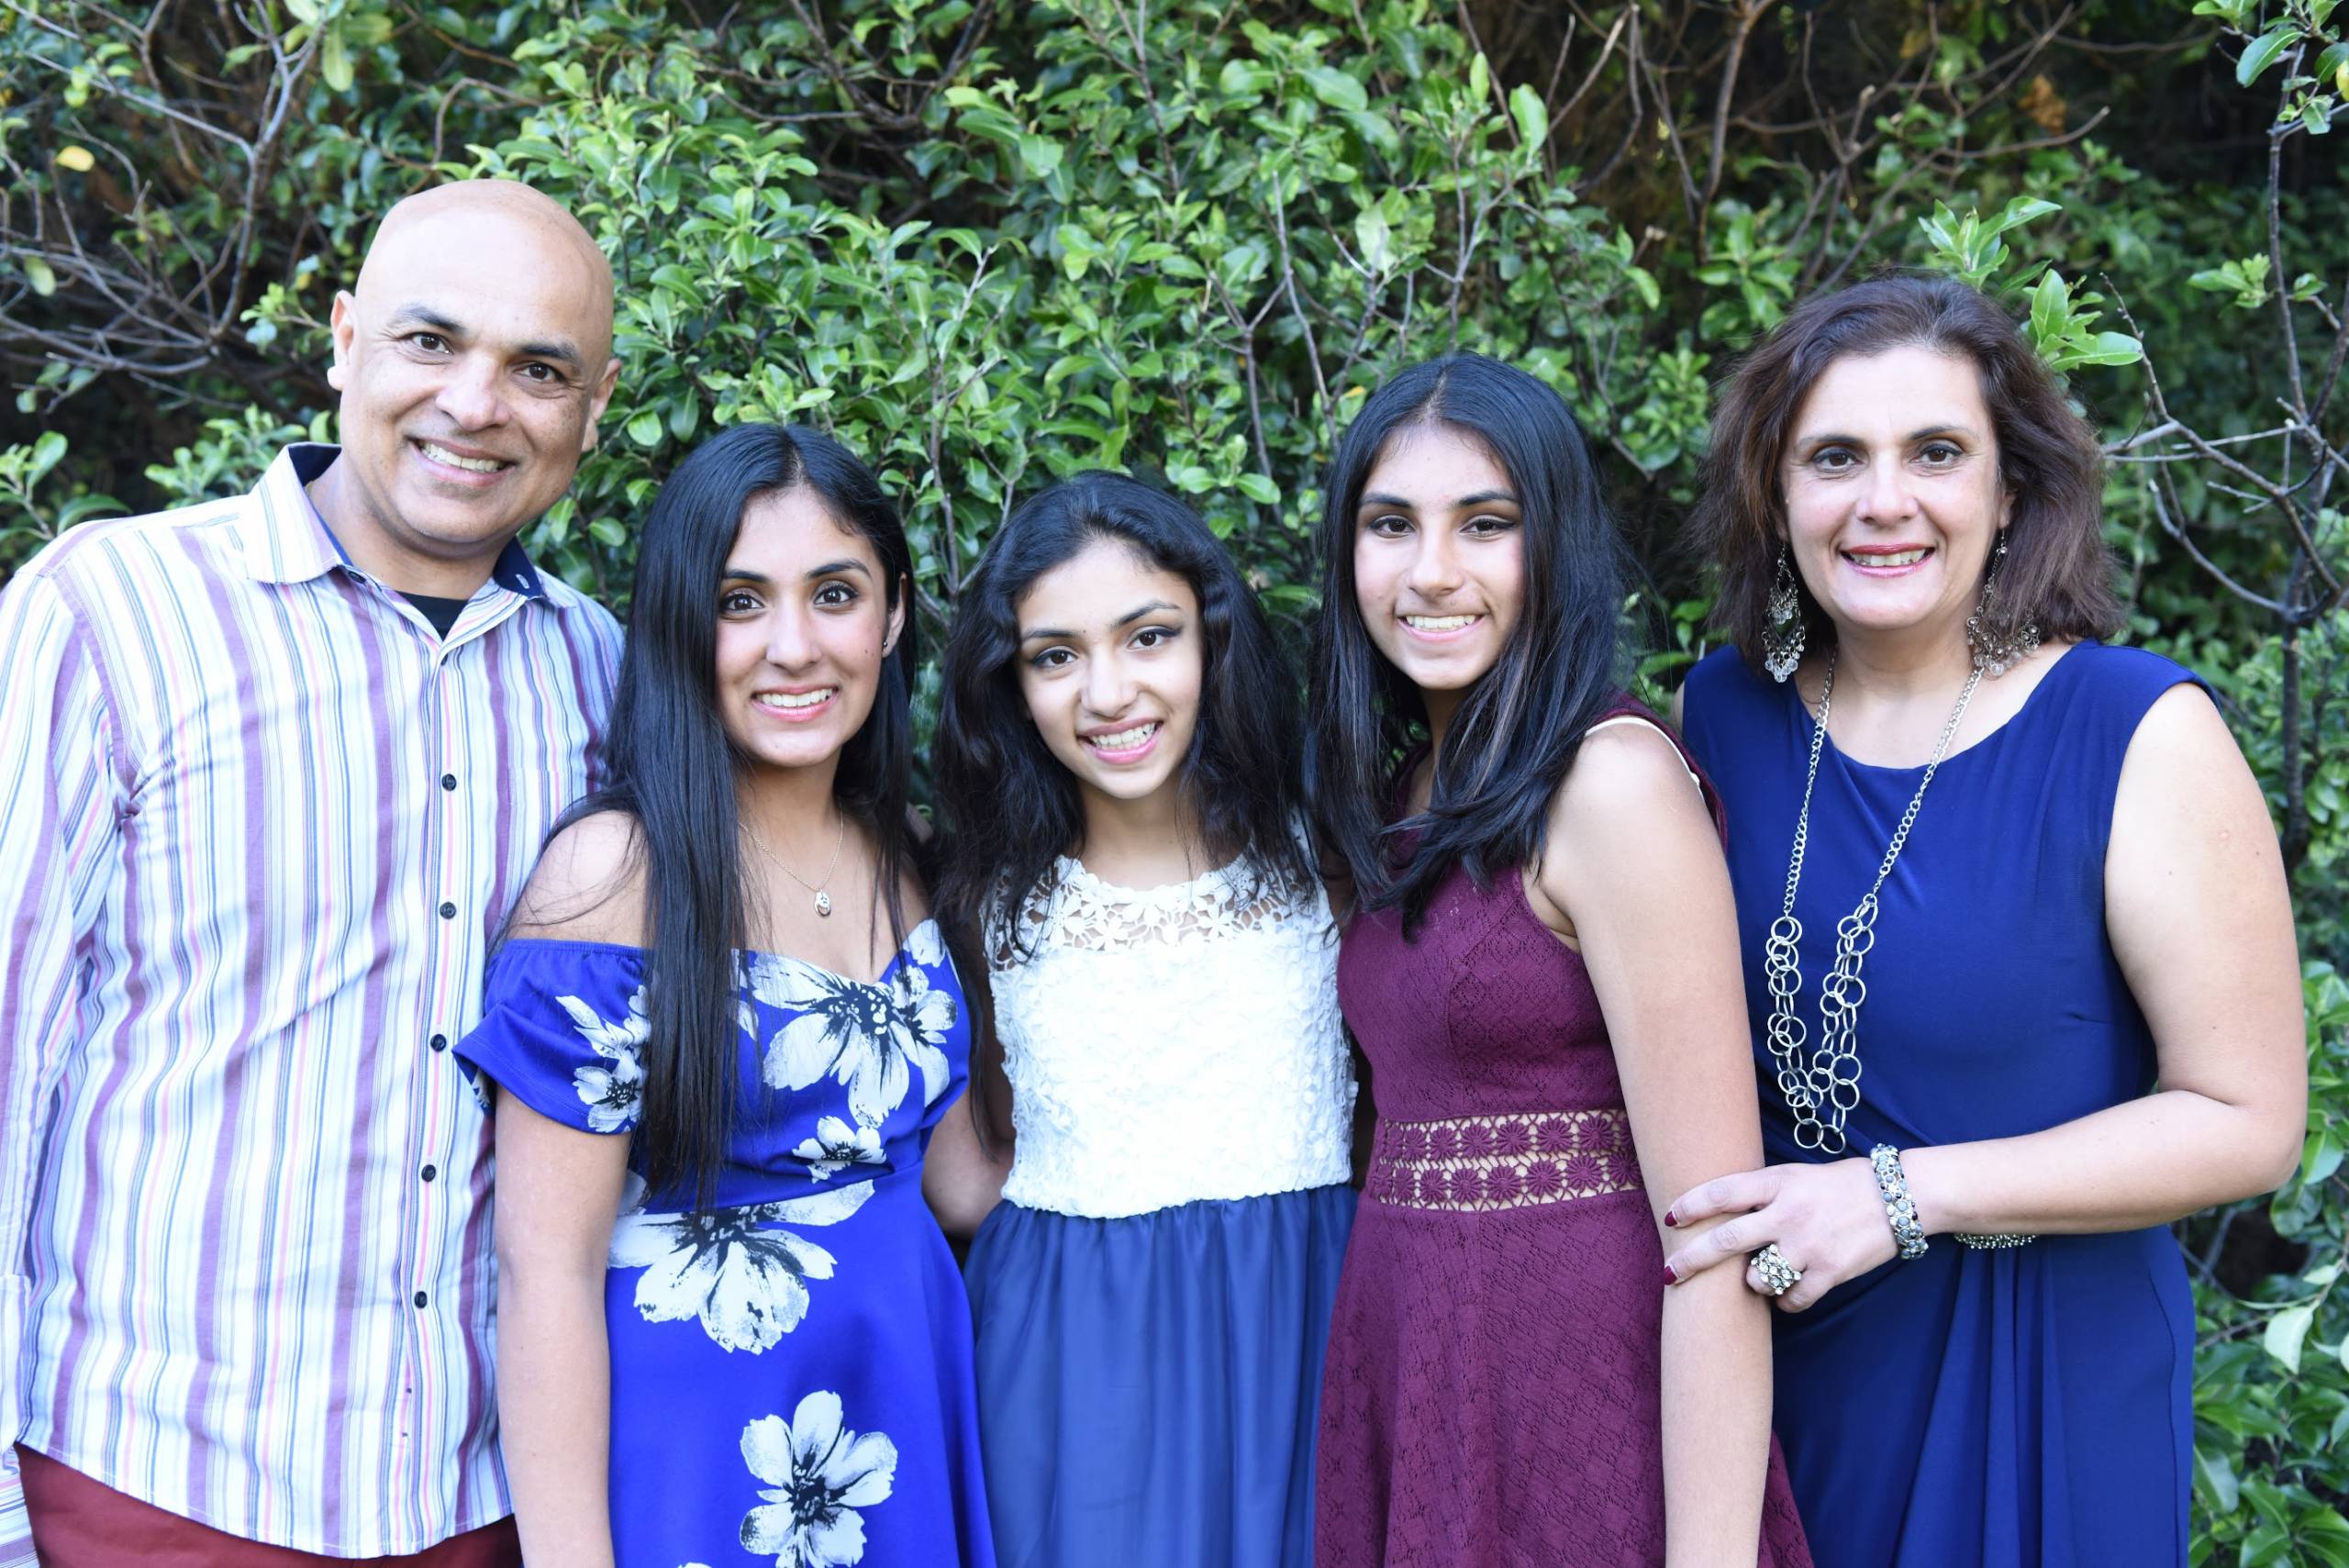 A family snapshot taken outdoors features a smiling father, mother and three teenage girls.